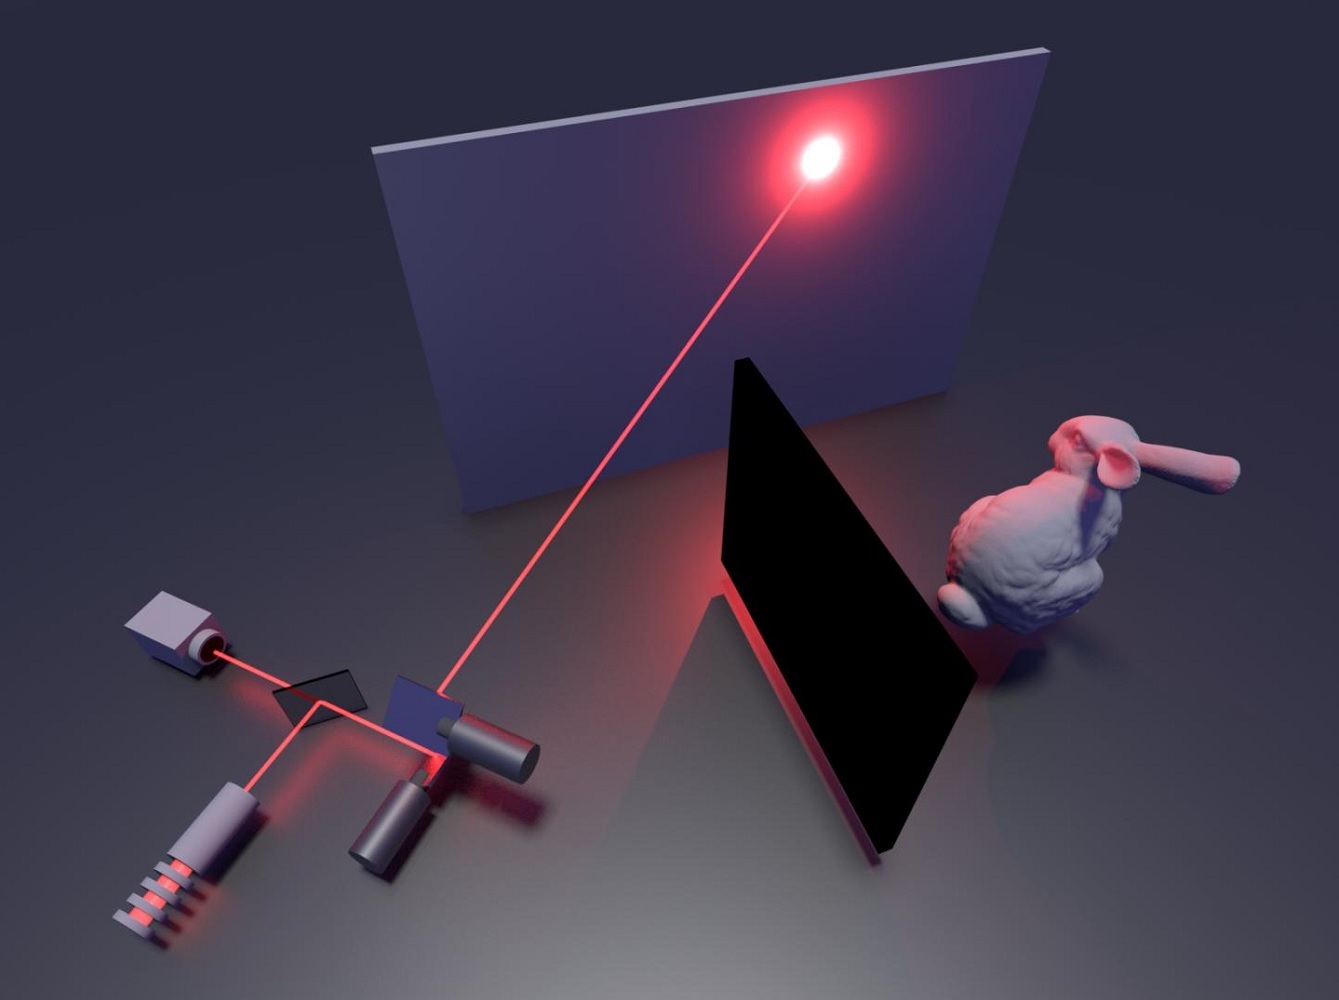 Illustration of the non-line-of-sight imaging system